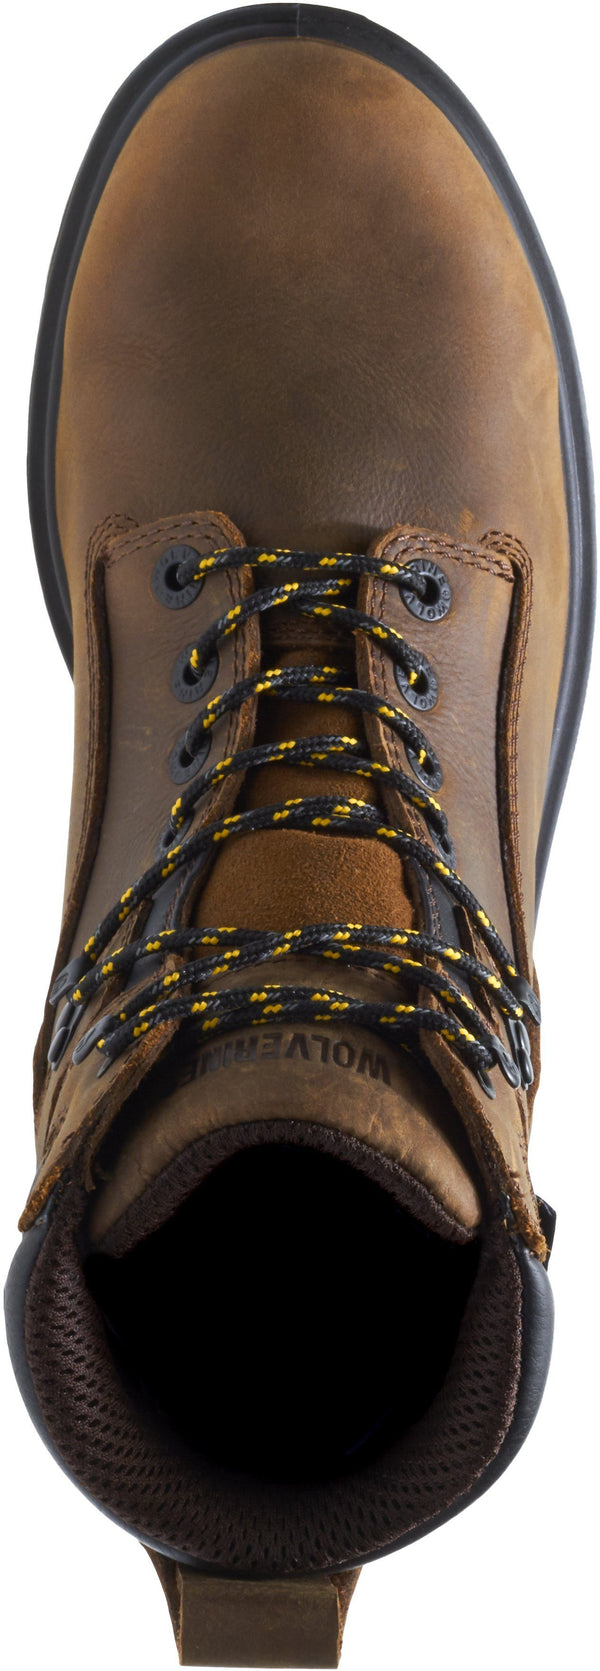 Brown Boots with Black soles, eyelets and laces with gold top view